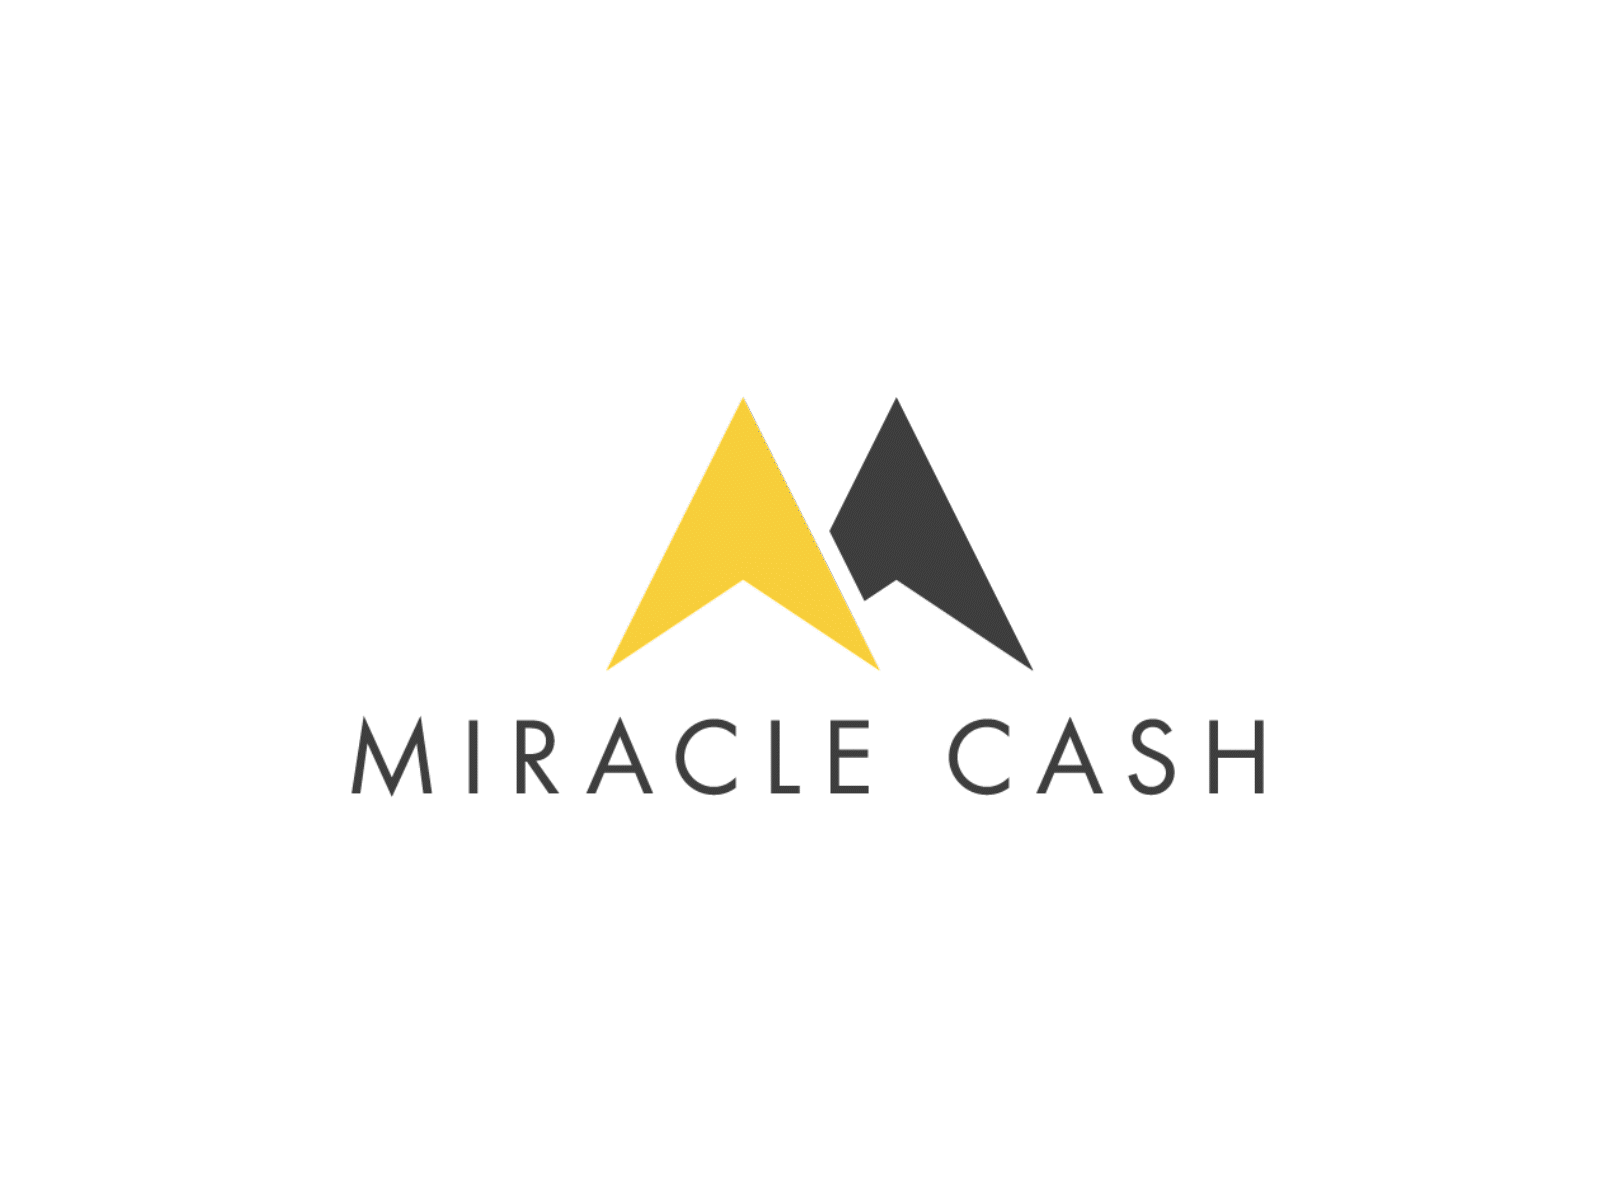 Miracle Cash aftereffects animation branding flat icon loading loading screen logo smooth vector